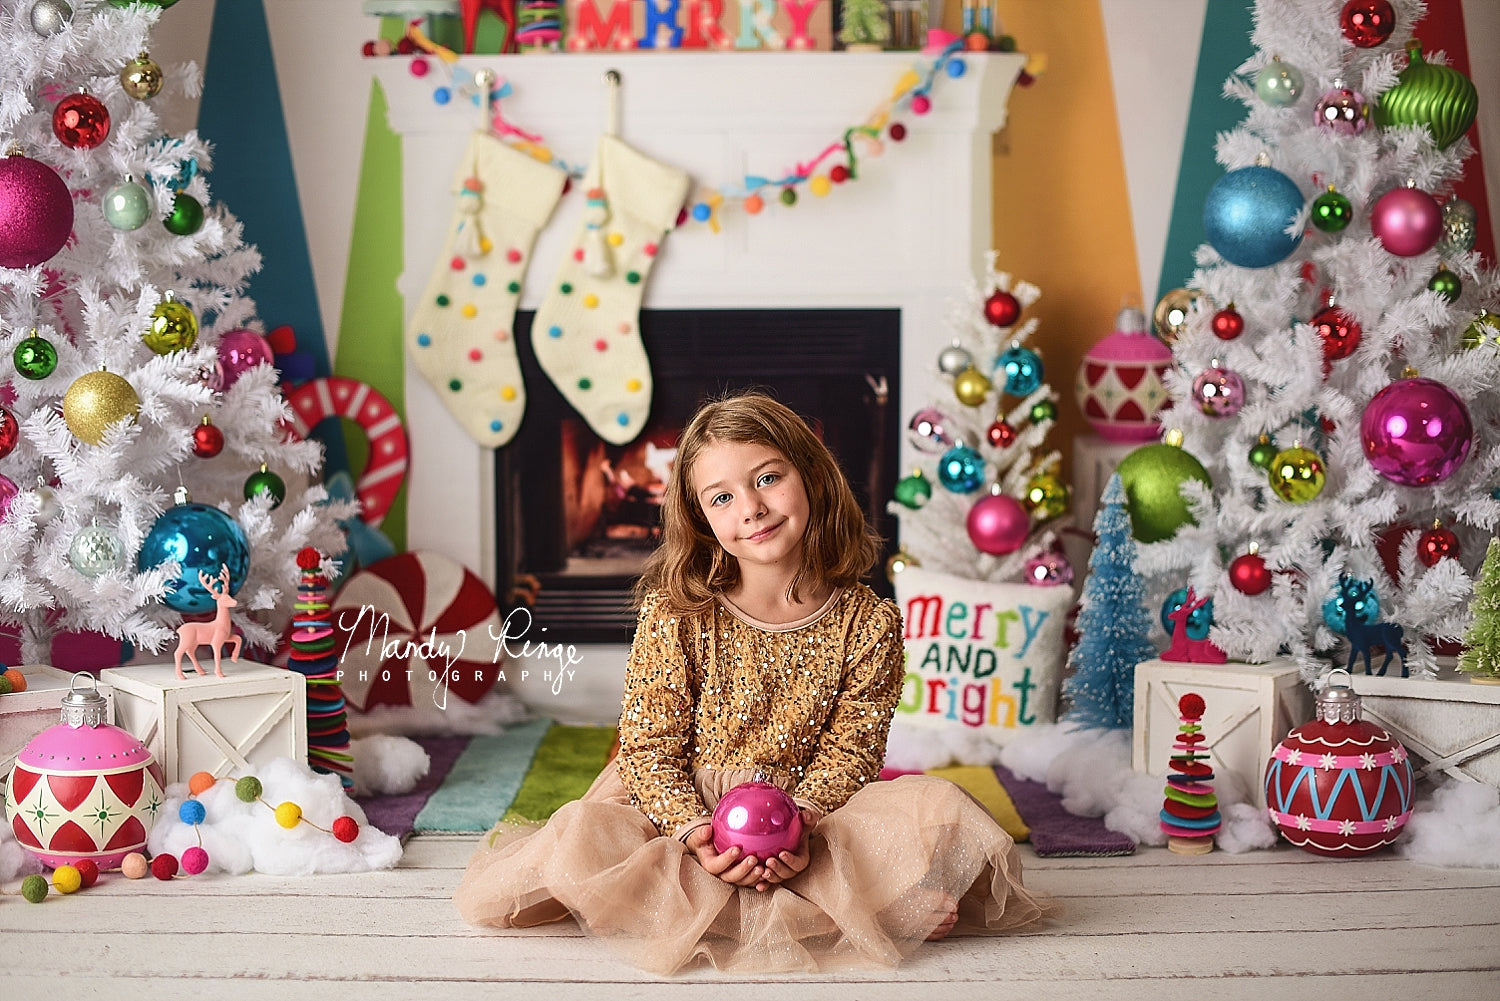 Kate Merry Christmas Bright Fireplace Backdrop Designed by Mandy Ringe Photography